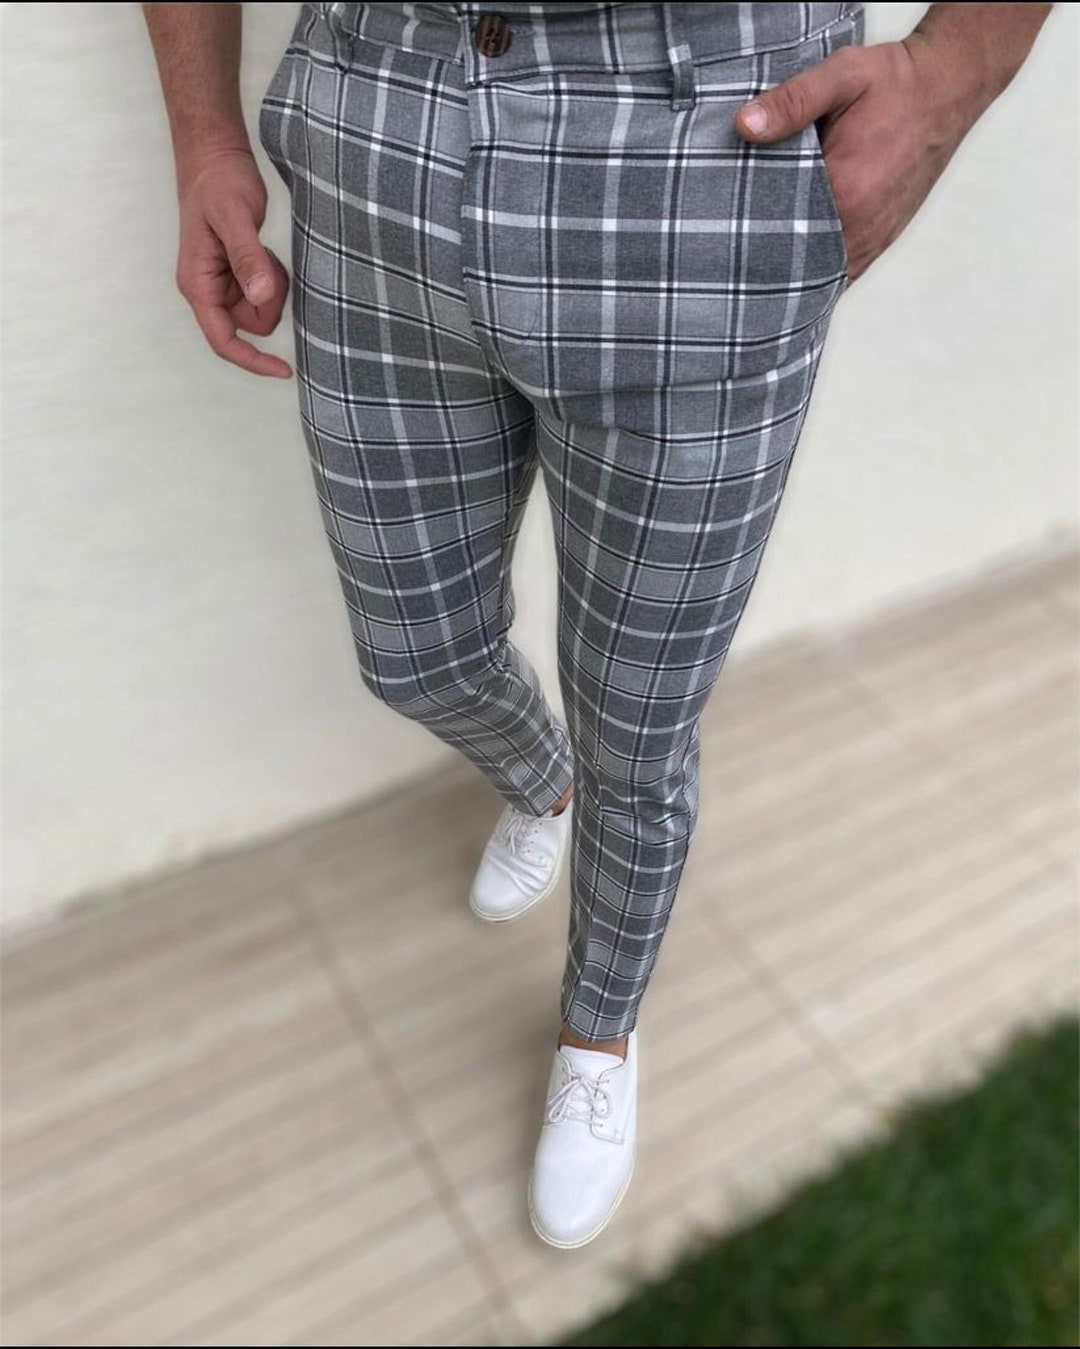 Plaid Pants Outfit For Men | Pants outfit men, Mens outfits, Mens casual  outfits summer